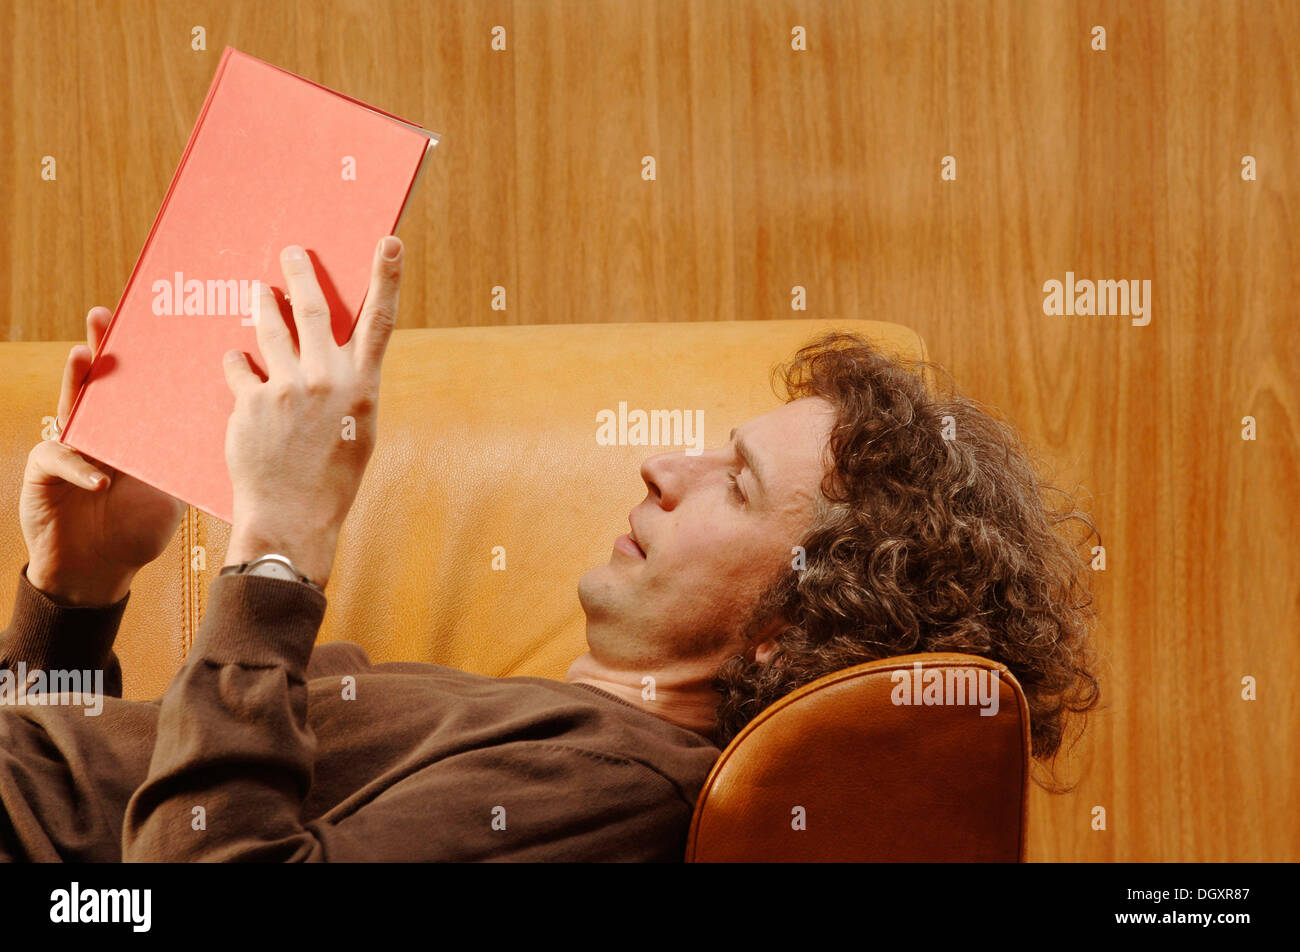 Man, 30-40, lying on a sofa, reading a red book Stock Photo